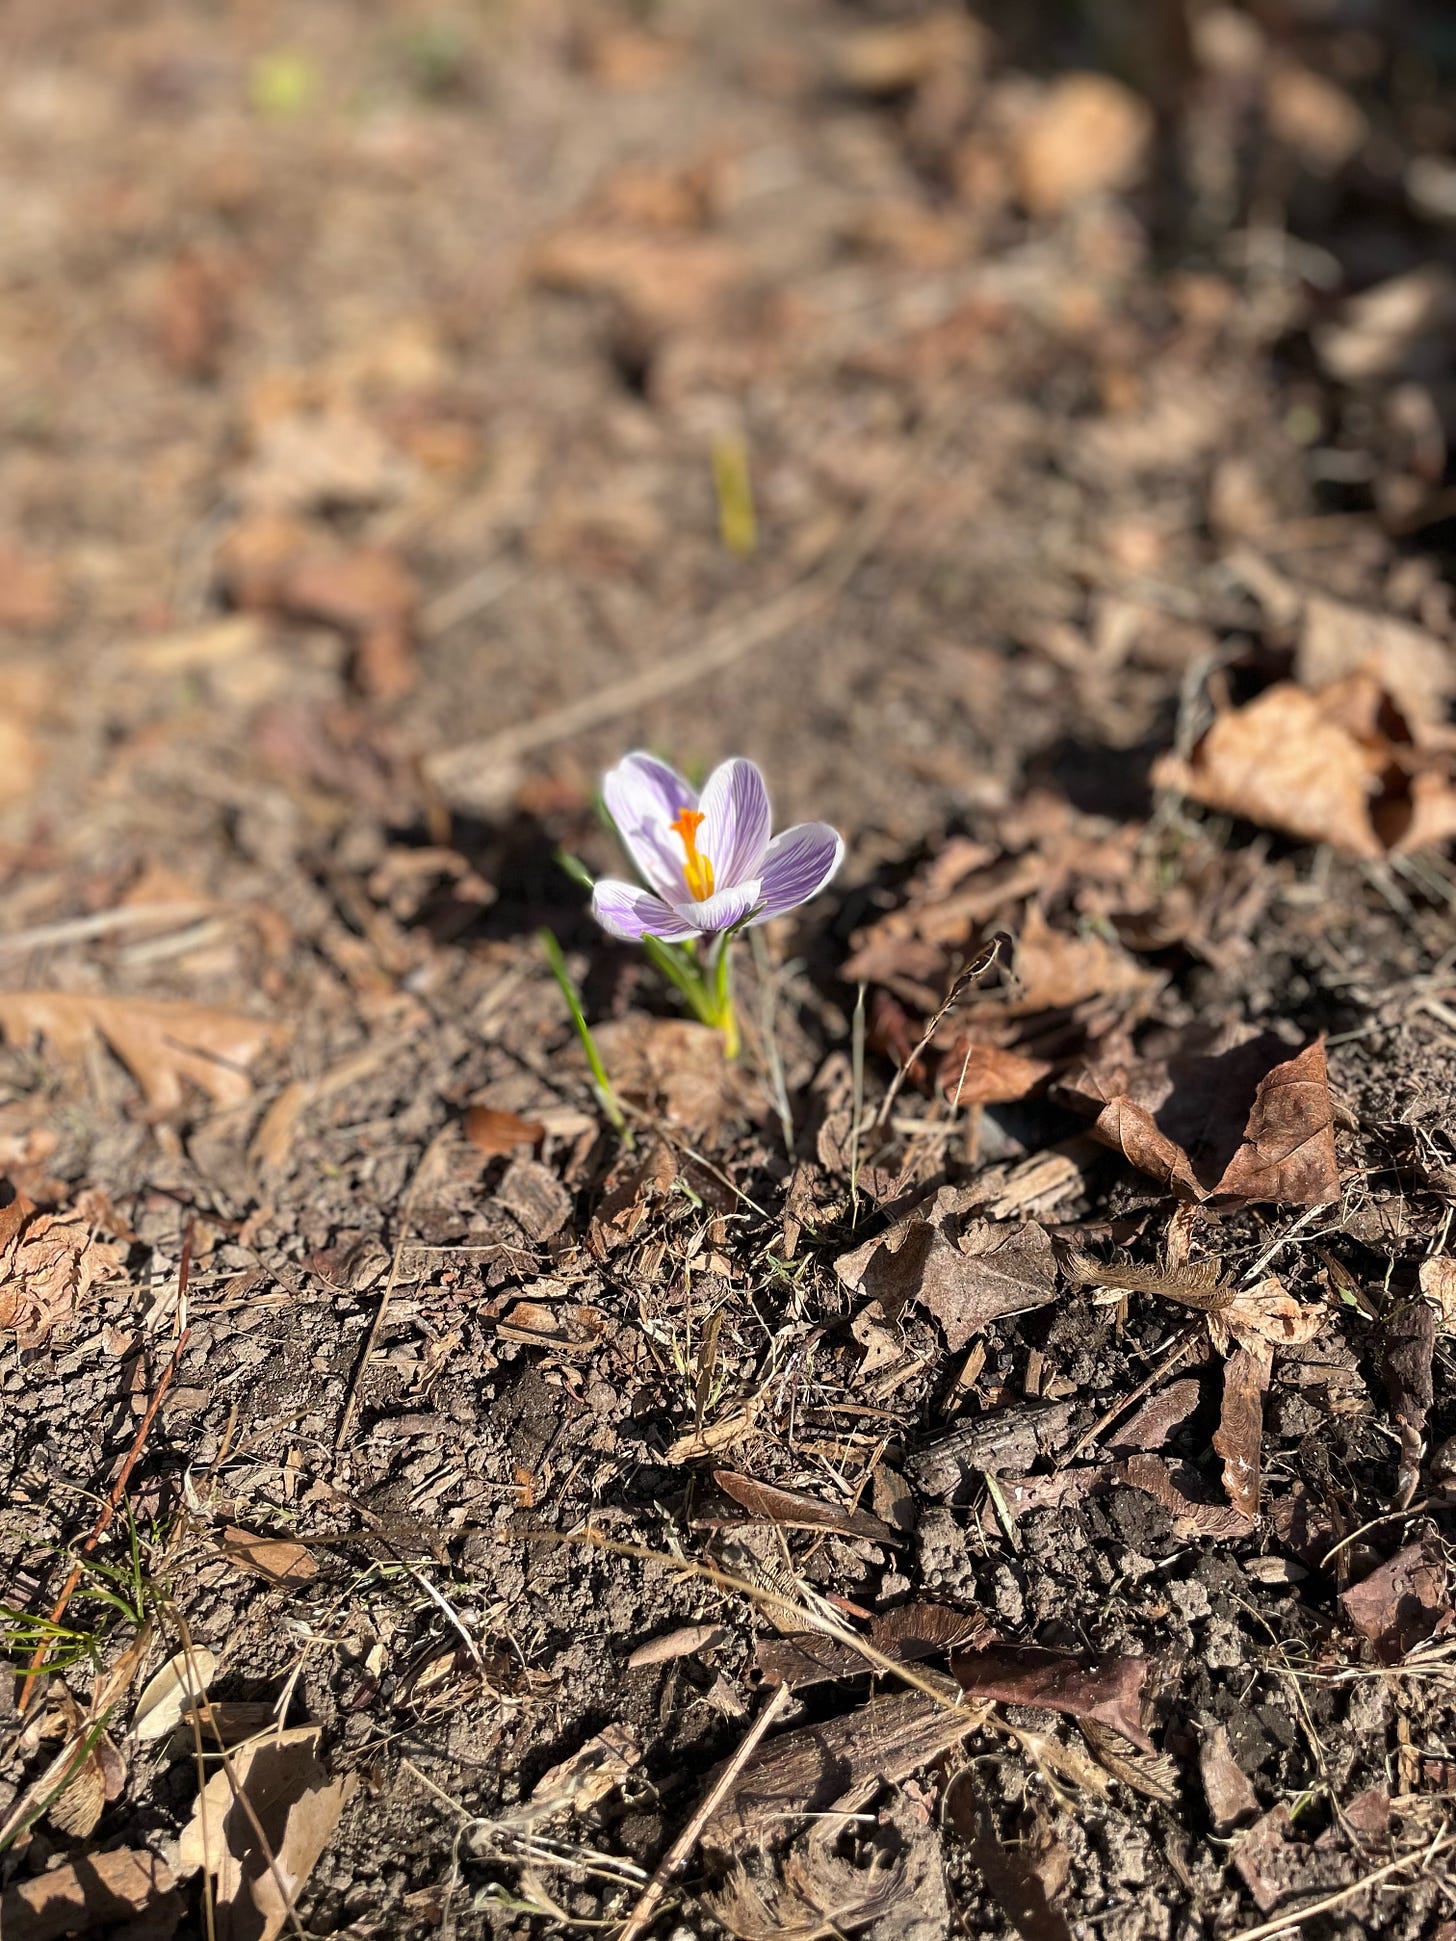 crocus at a distance surrounded by brown leaves